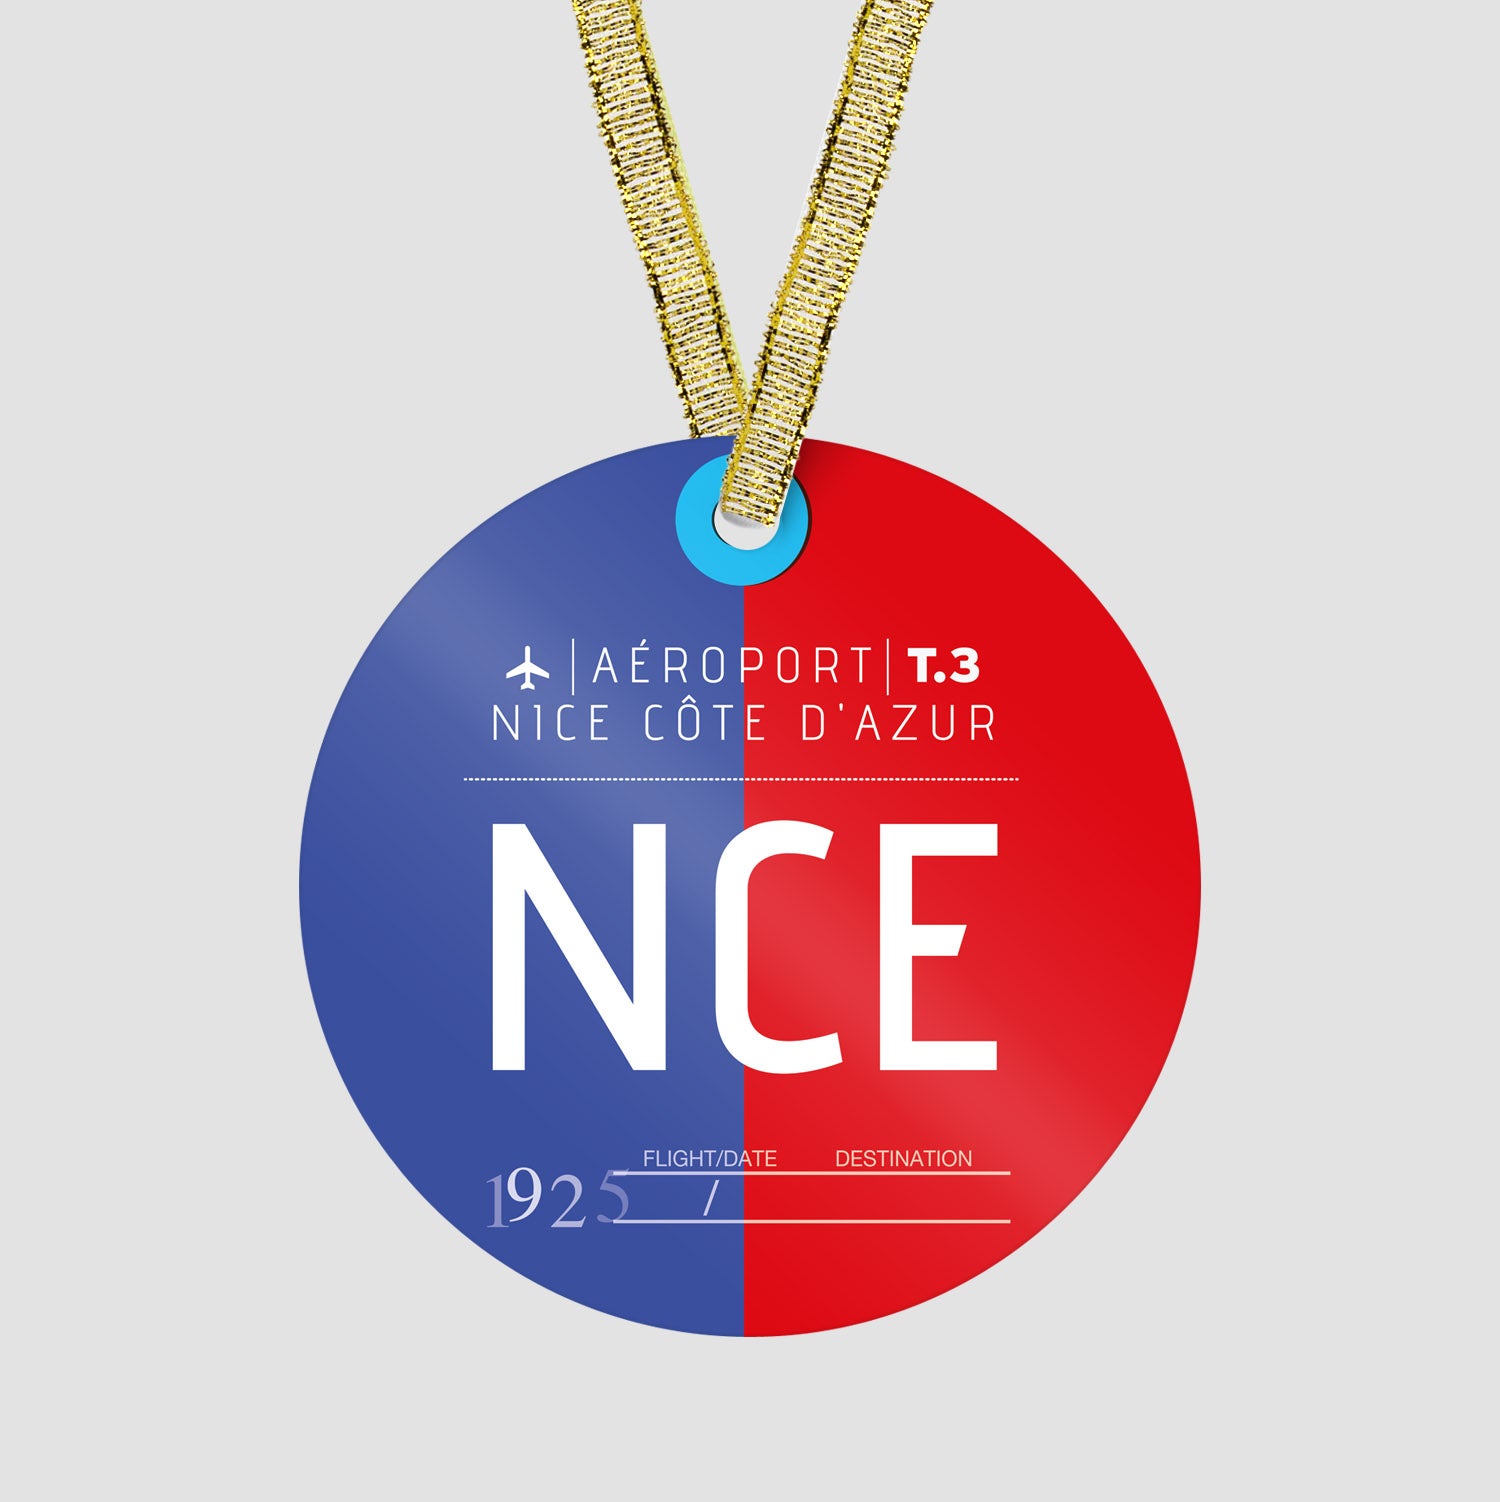 NCE - Ornament - Airportag